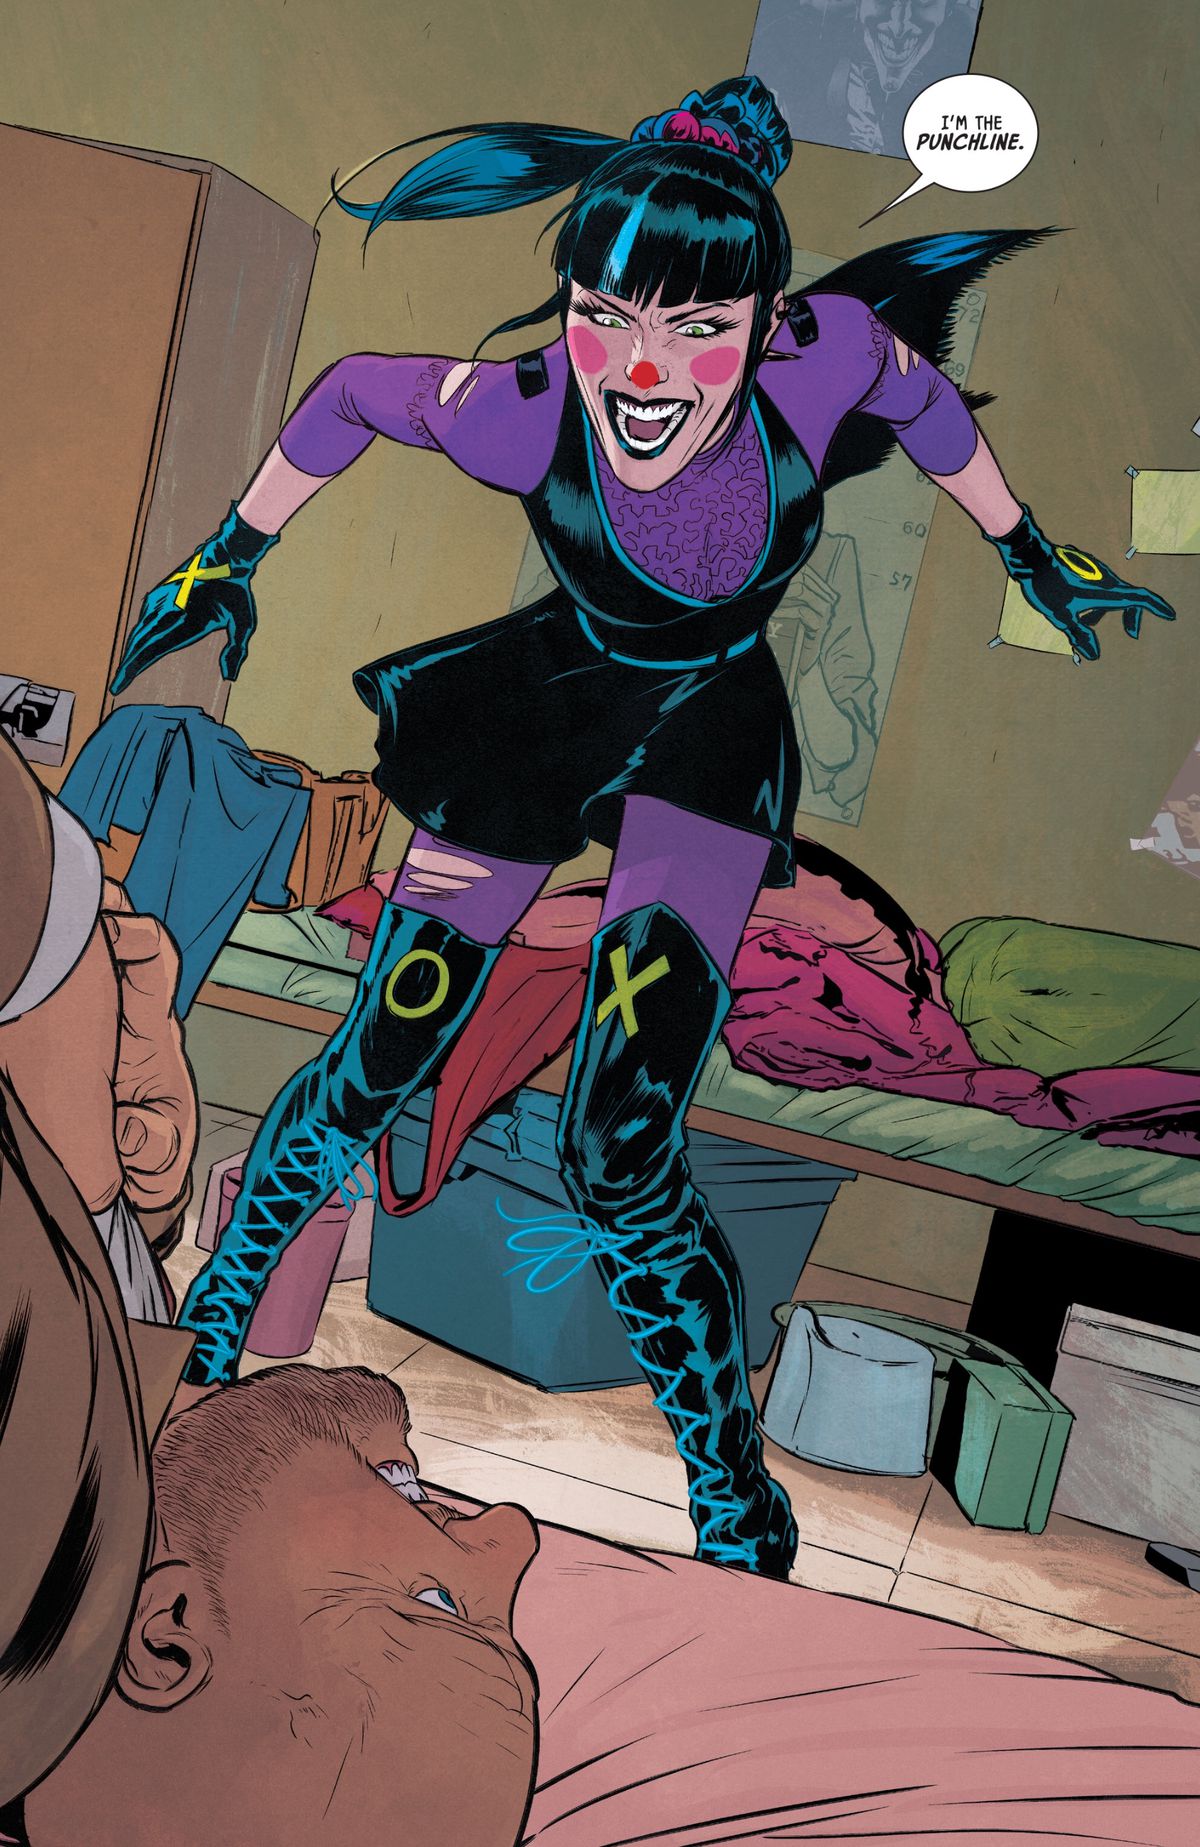 “I’m the punchline,” snarls Punchline. In her full costume she wears a ripped purple shirt and tights, along with a black jumper, gloves, and pink and red clown makeup, in The Joker 80th Anniversary 100-Page Super Spectacular, DC Comics (2020).